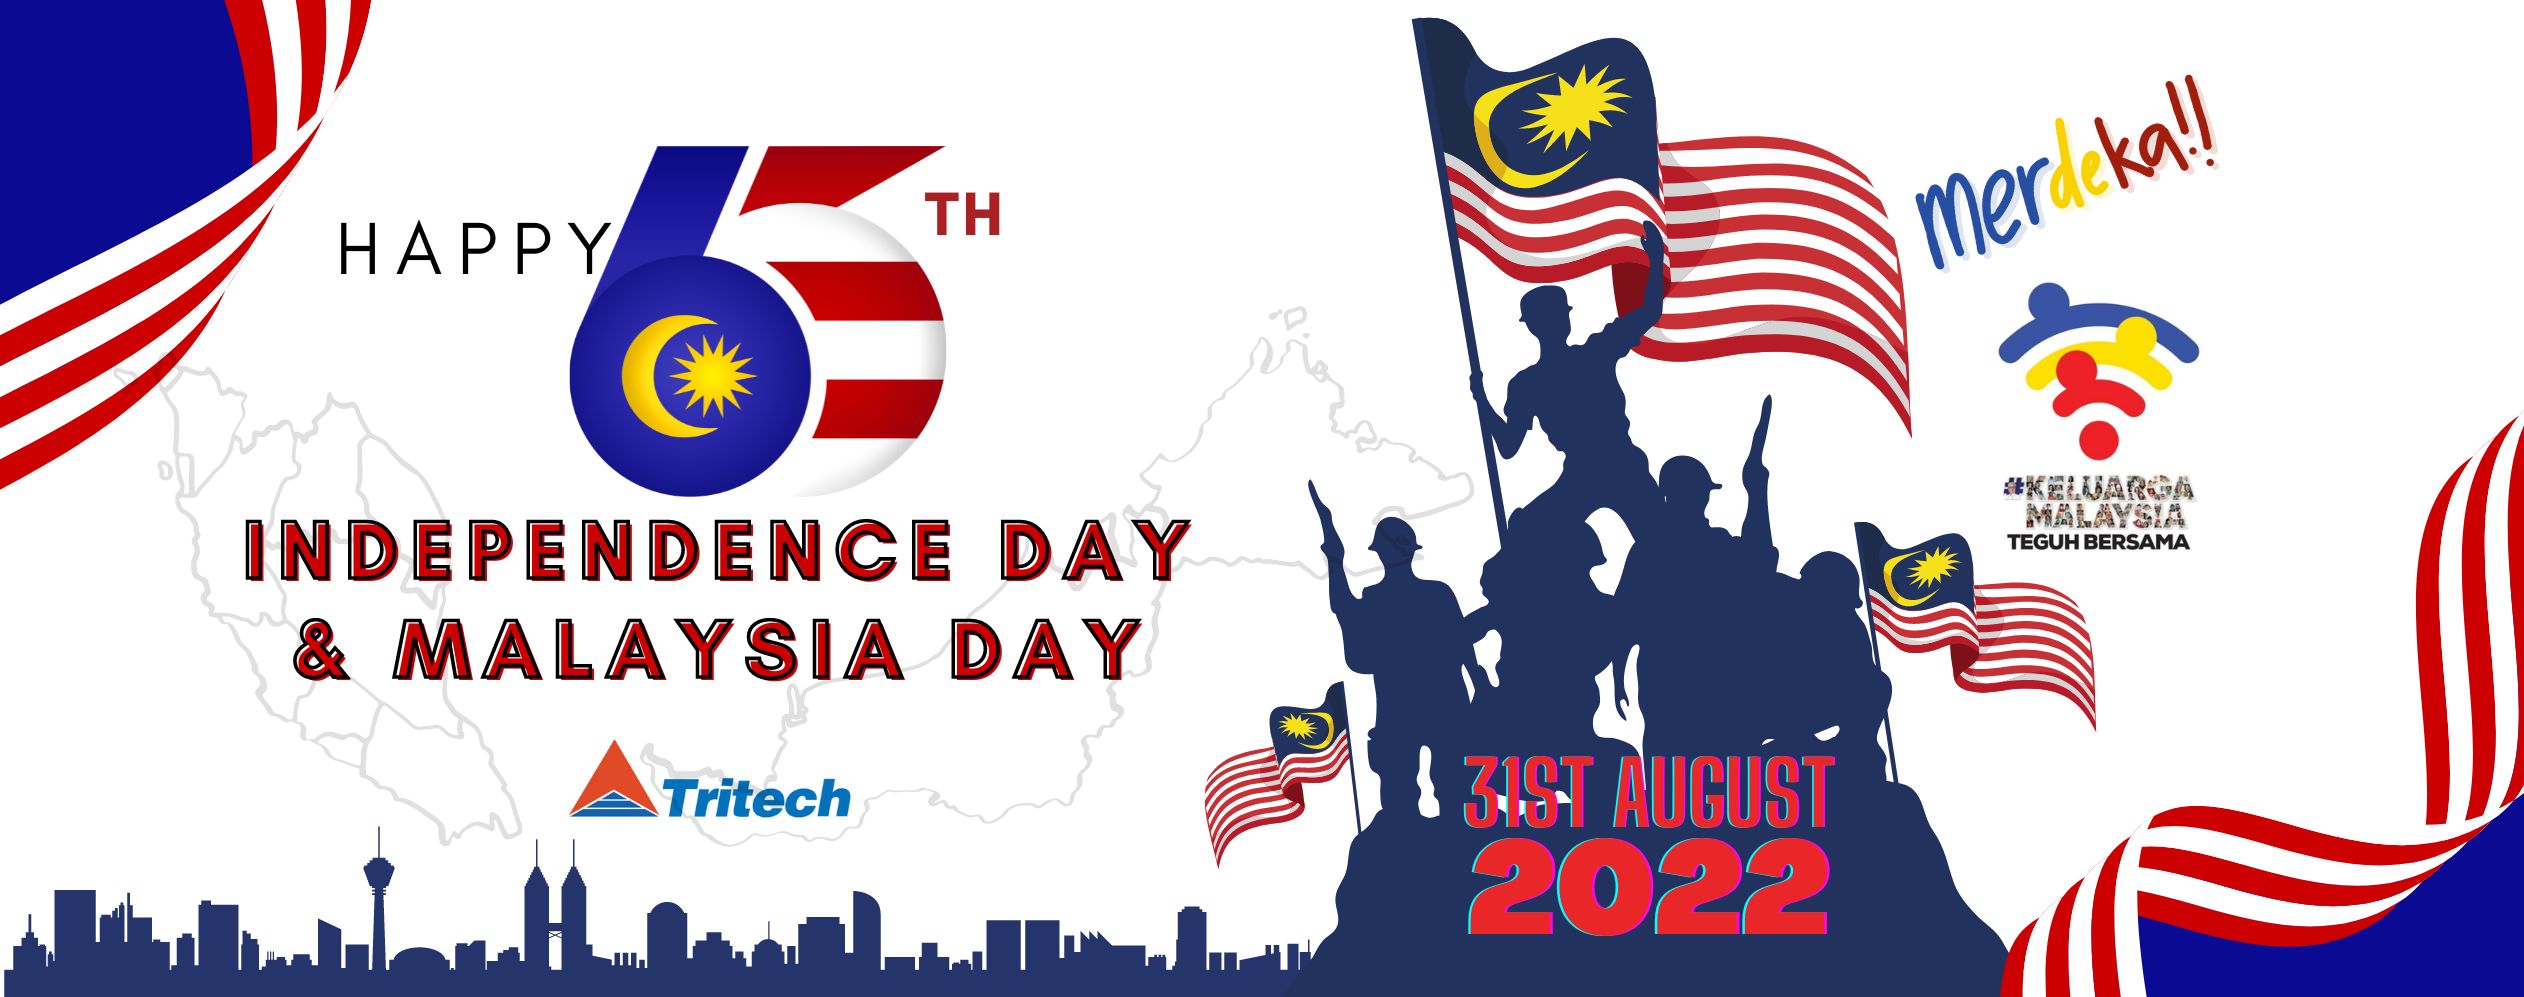 Happy Independence Day & Malaysia Day